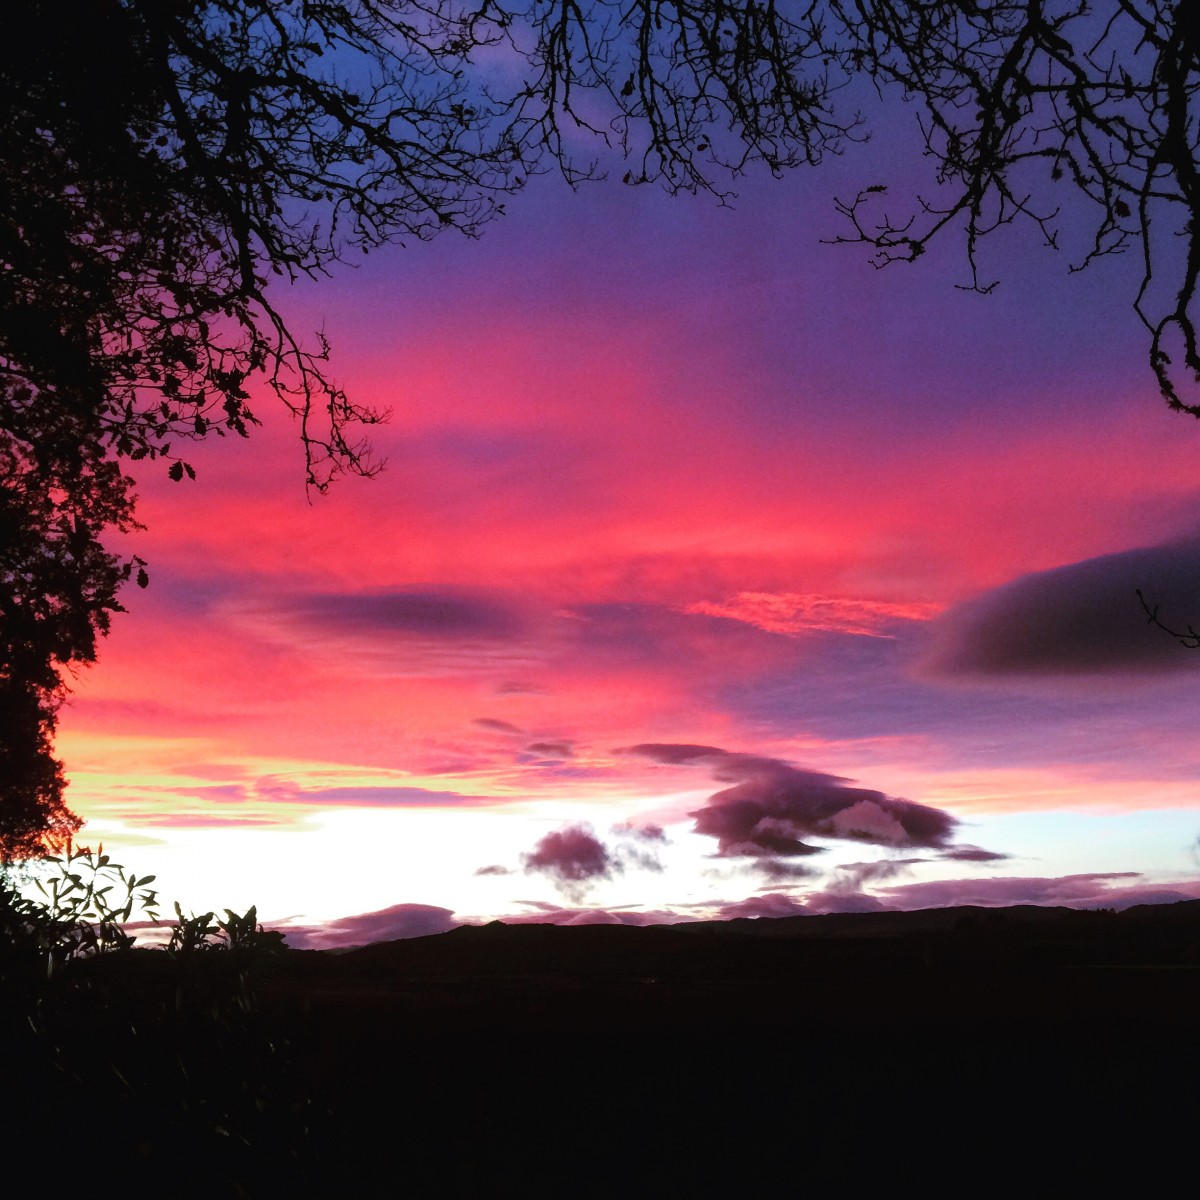 This picture is by Derek Browning and the tree acts as a frame to this beautifully coloured night sky over Perthshire.